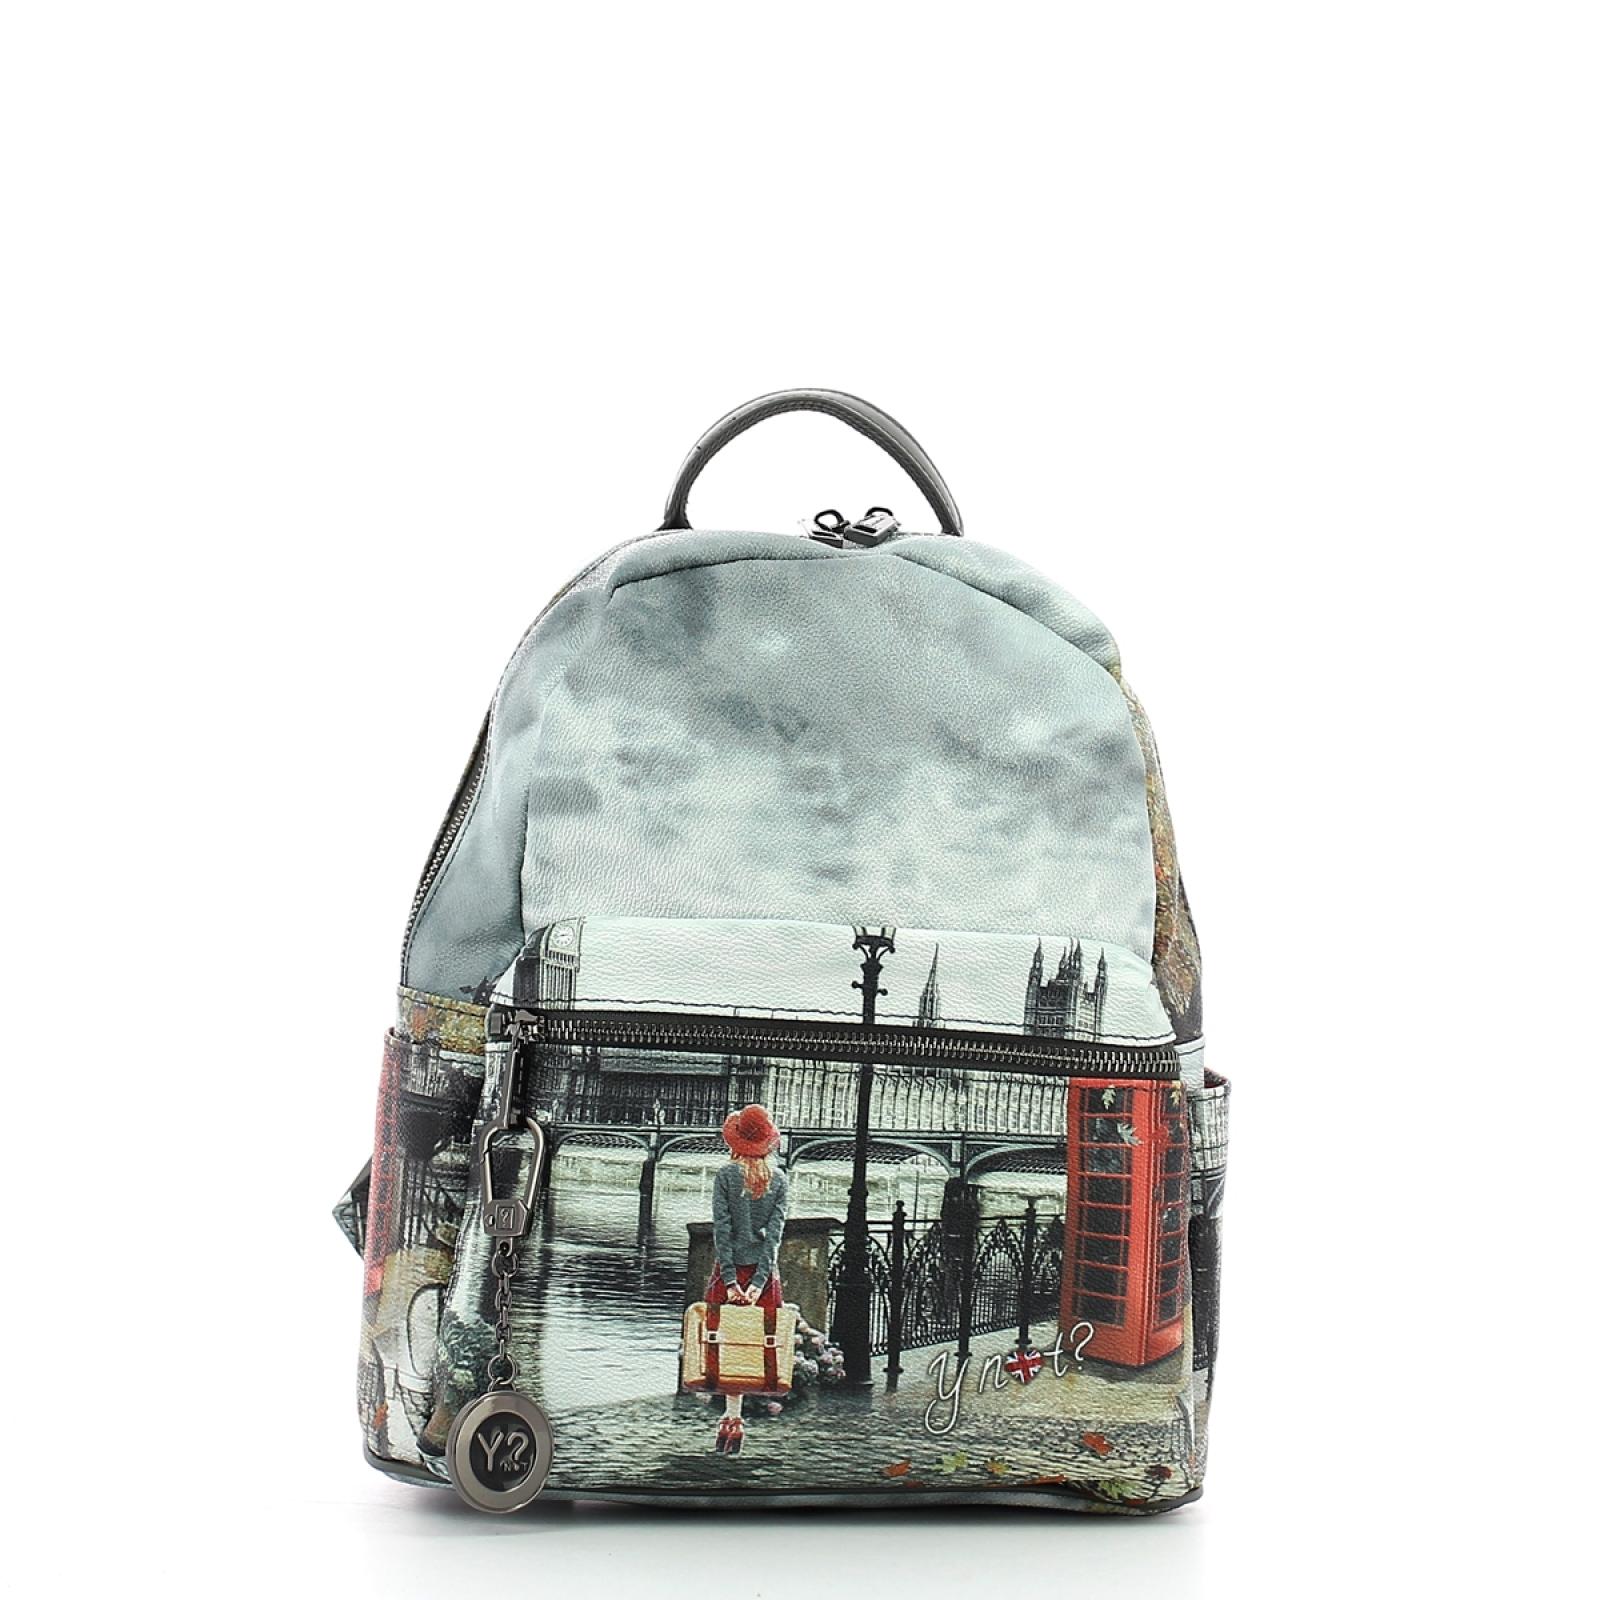 Backpack Small Yesbag - 1